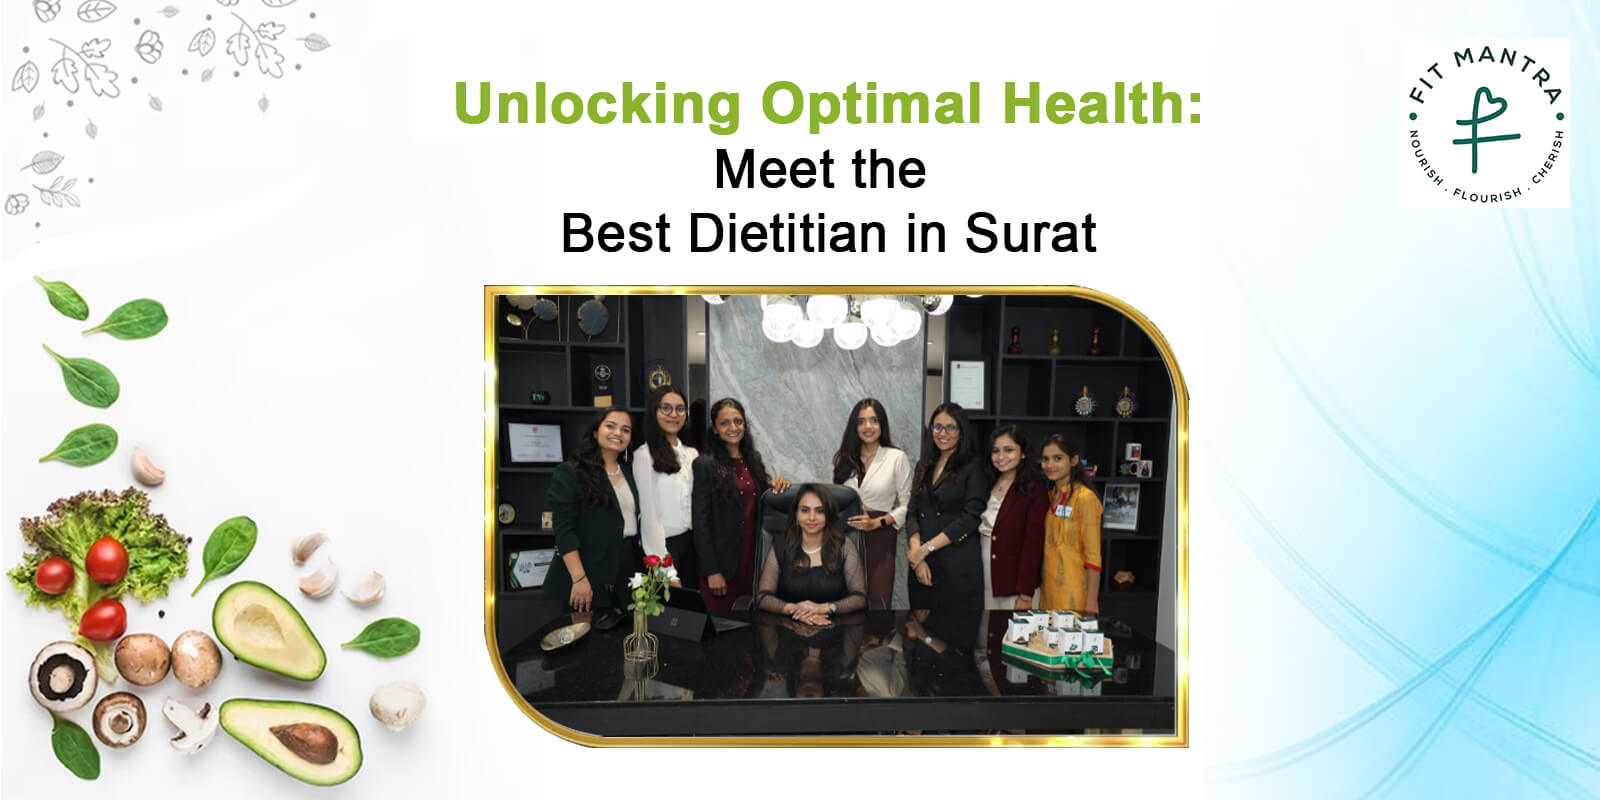 Unlocking Optimal Health: Meet the Best Dietitian in Surat and Visit the Top Diet Clinic in the City!